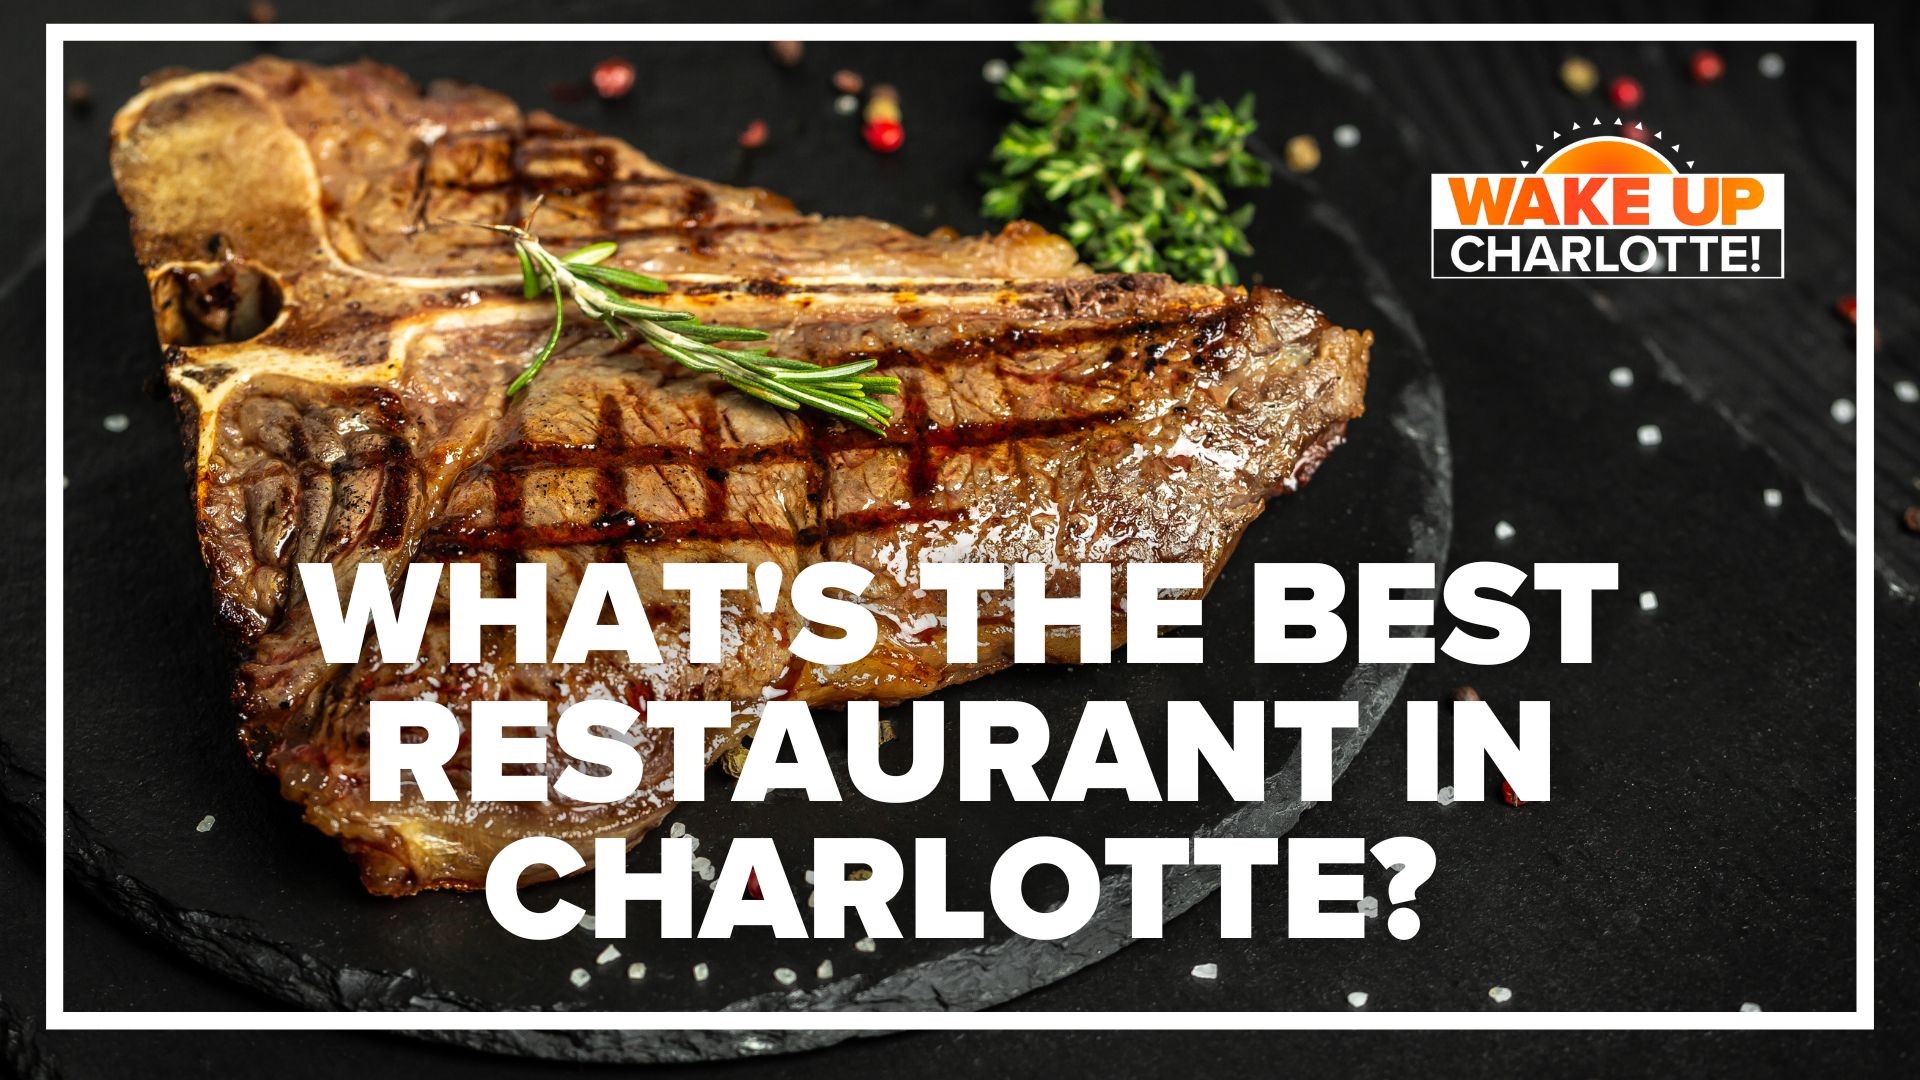 Charlotte's Steak 48 was recently ranked among the 100 restaurants in the U.S. What's your favorite place to grab a bite in the Carolinas?